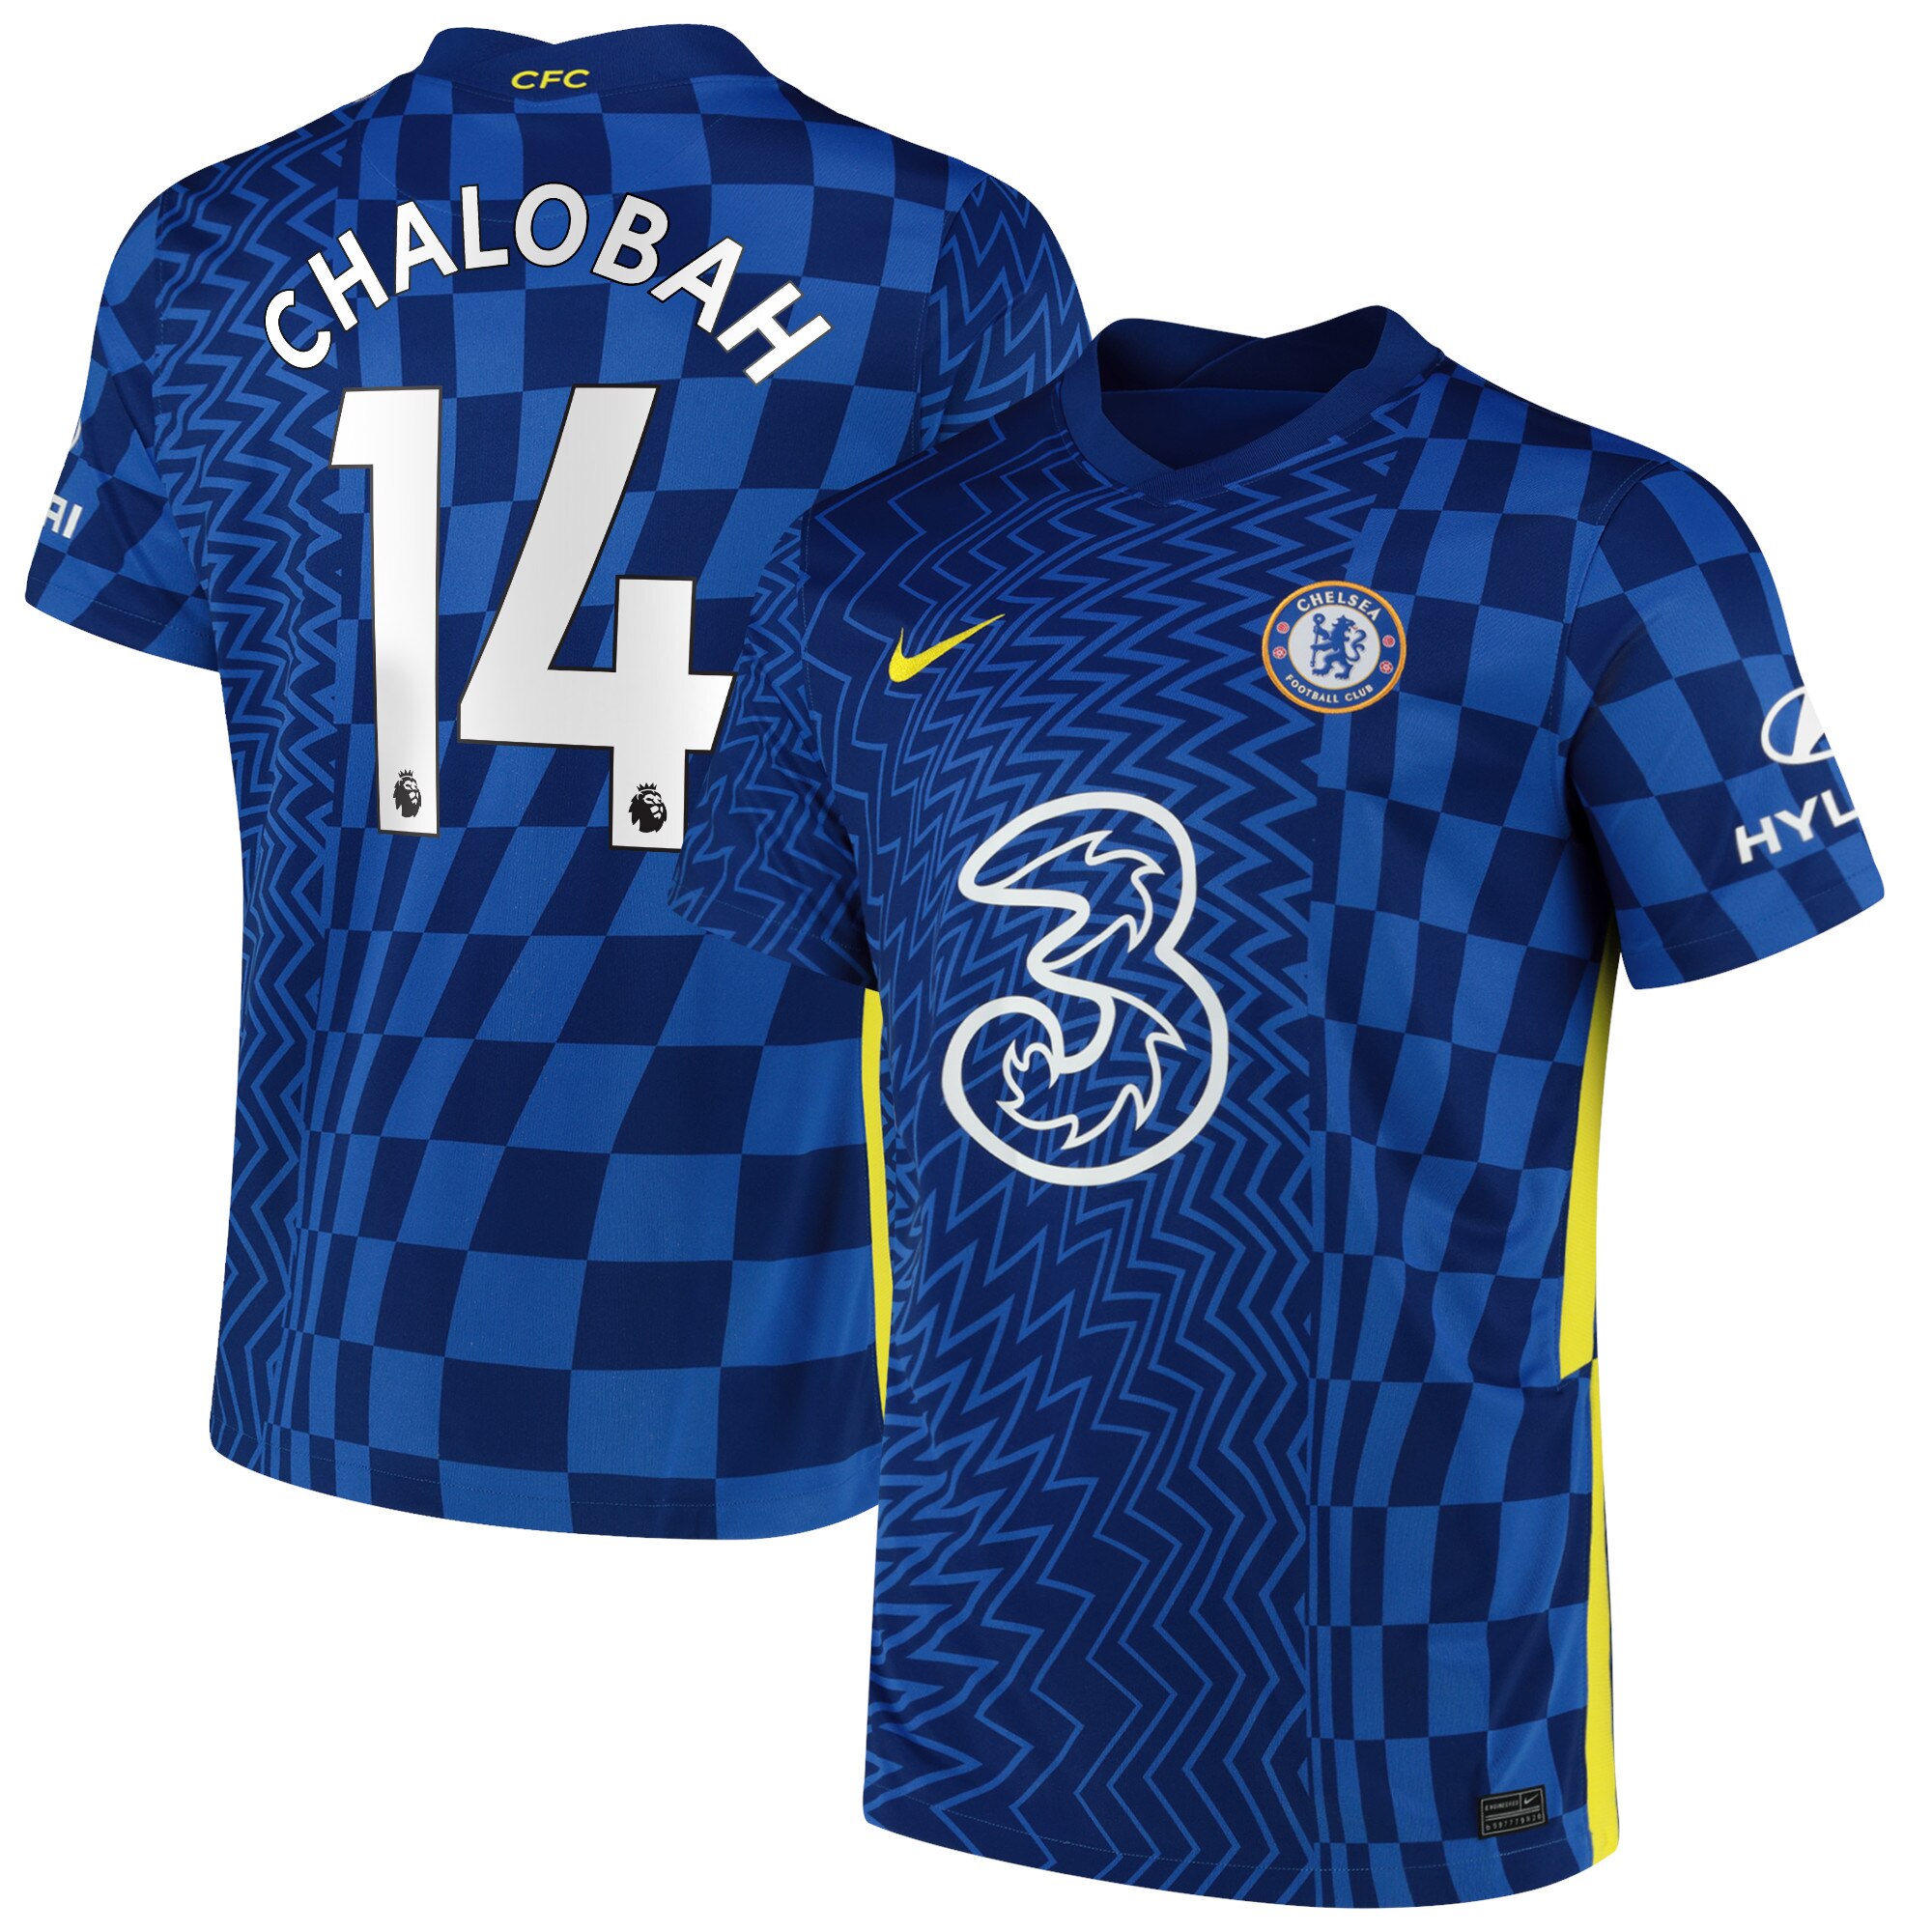 Chelsea Home Stadium Shirt 2021-22 with Chalobah 14 printing